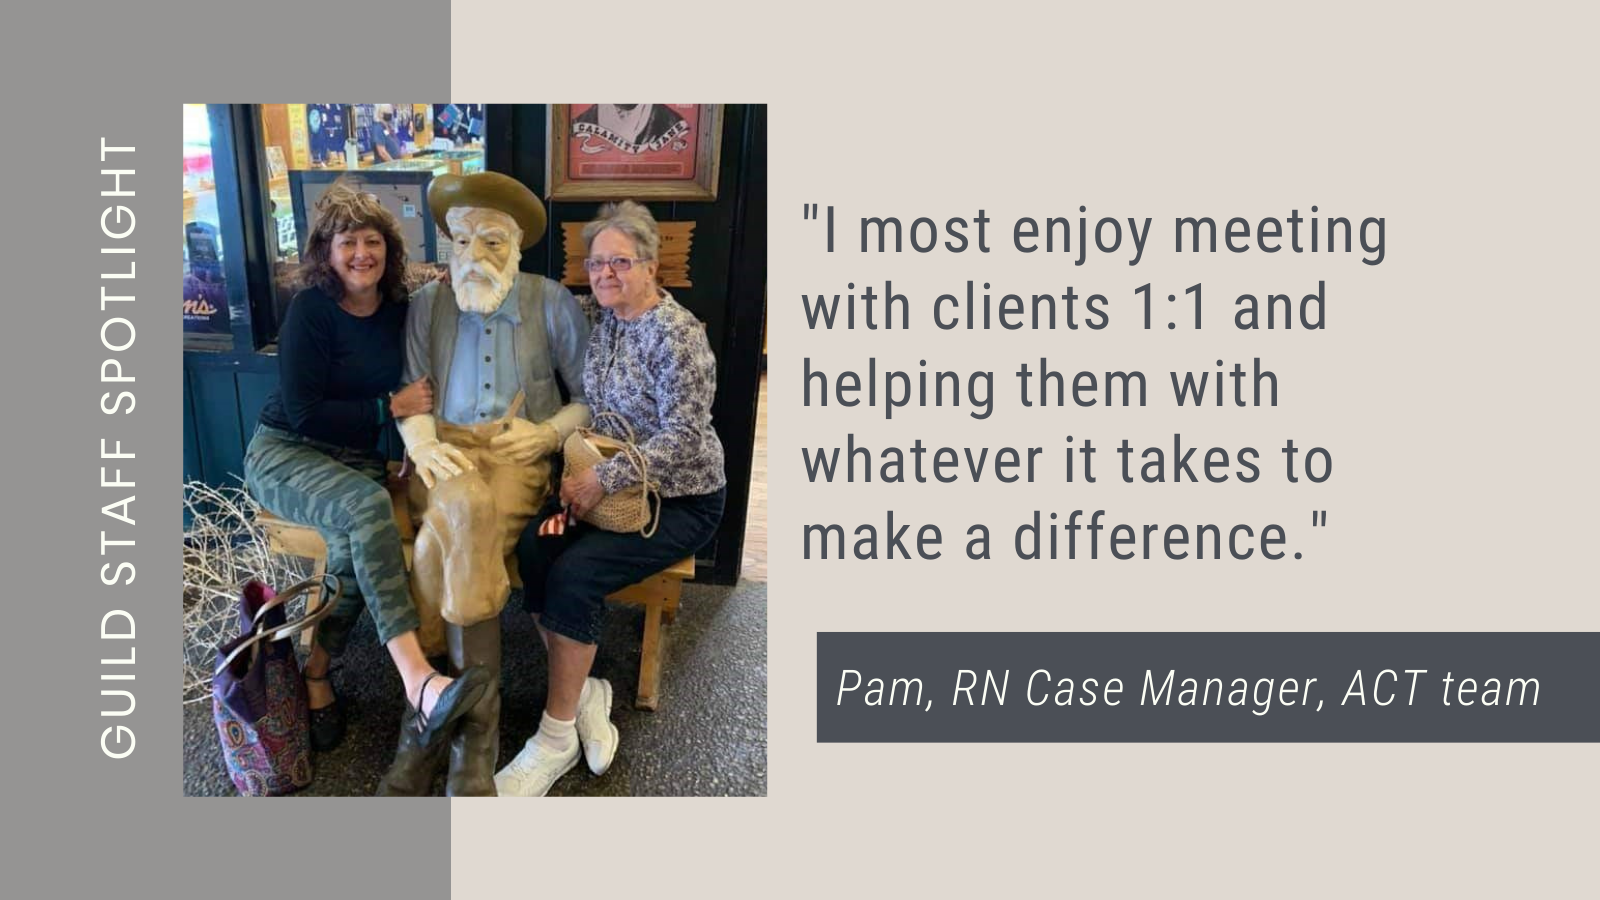 Pam, RN Case Manager